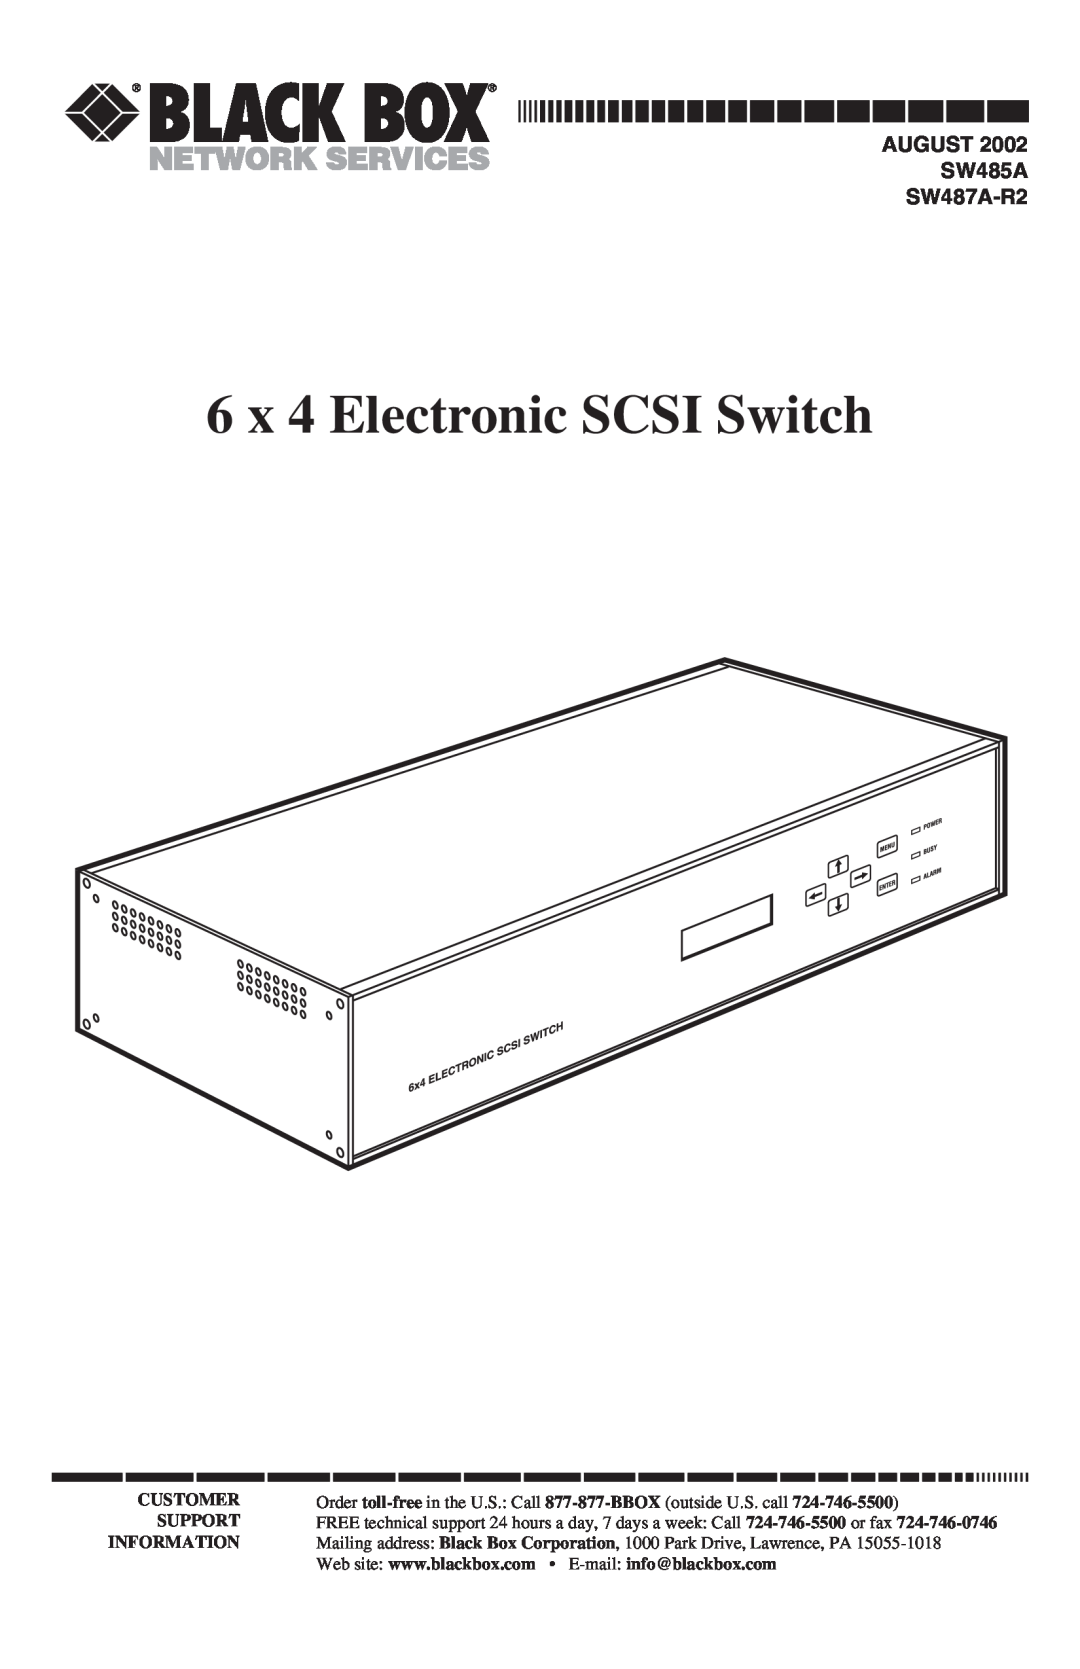 Black Box manual 6 x 4 Electronic SCSI Switch, AUGUST SW485A SW487A-R2, Customer, Support, Information 